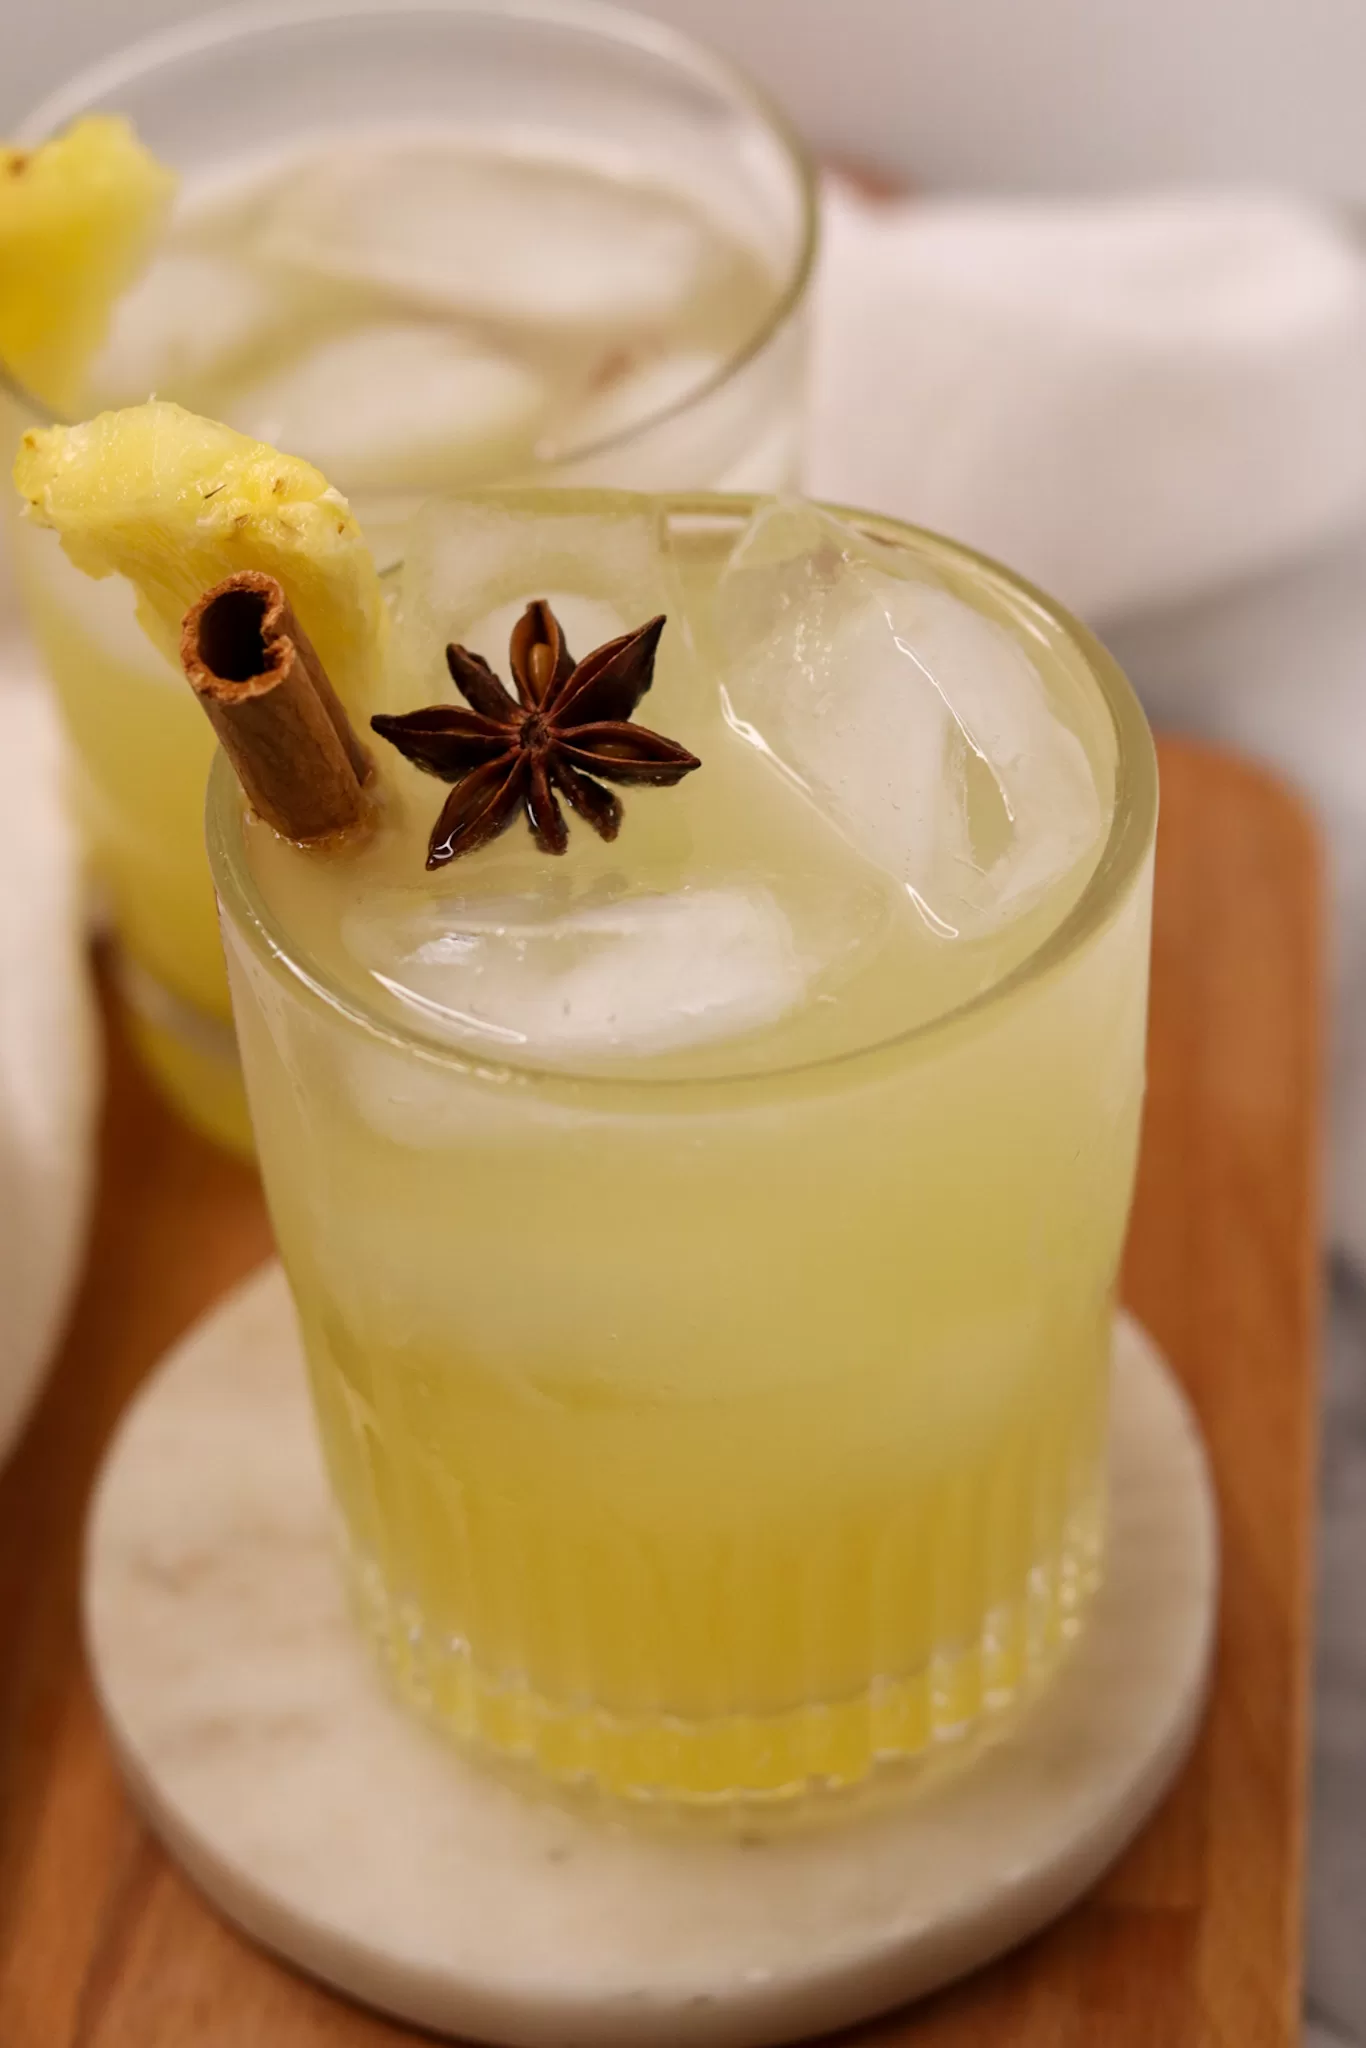 Yellow and bubbly pineapple ginger beer mocktail over ice in a rocks glass, garnished with star anise, a cinnamon stick and a pineapple wedge.